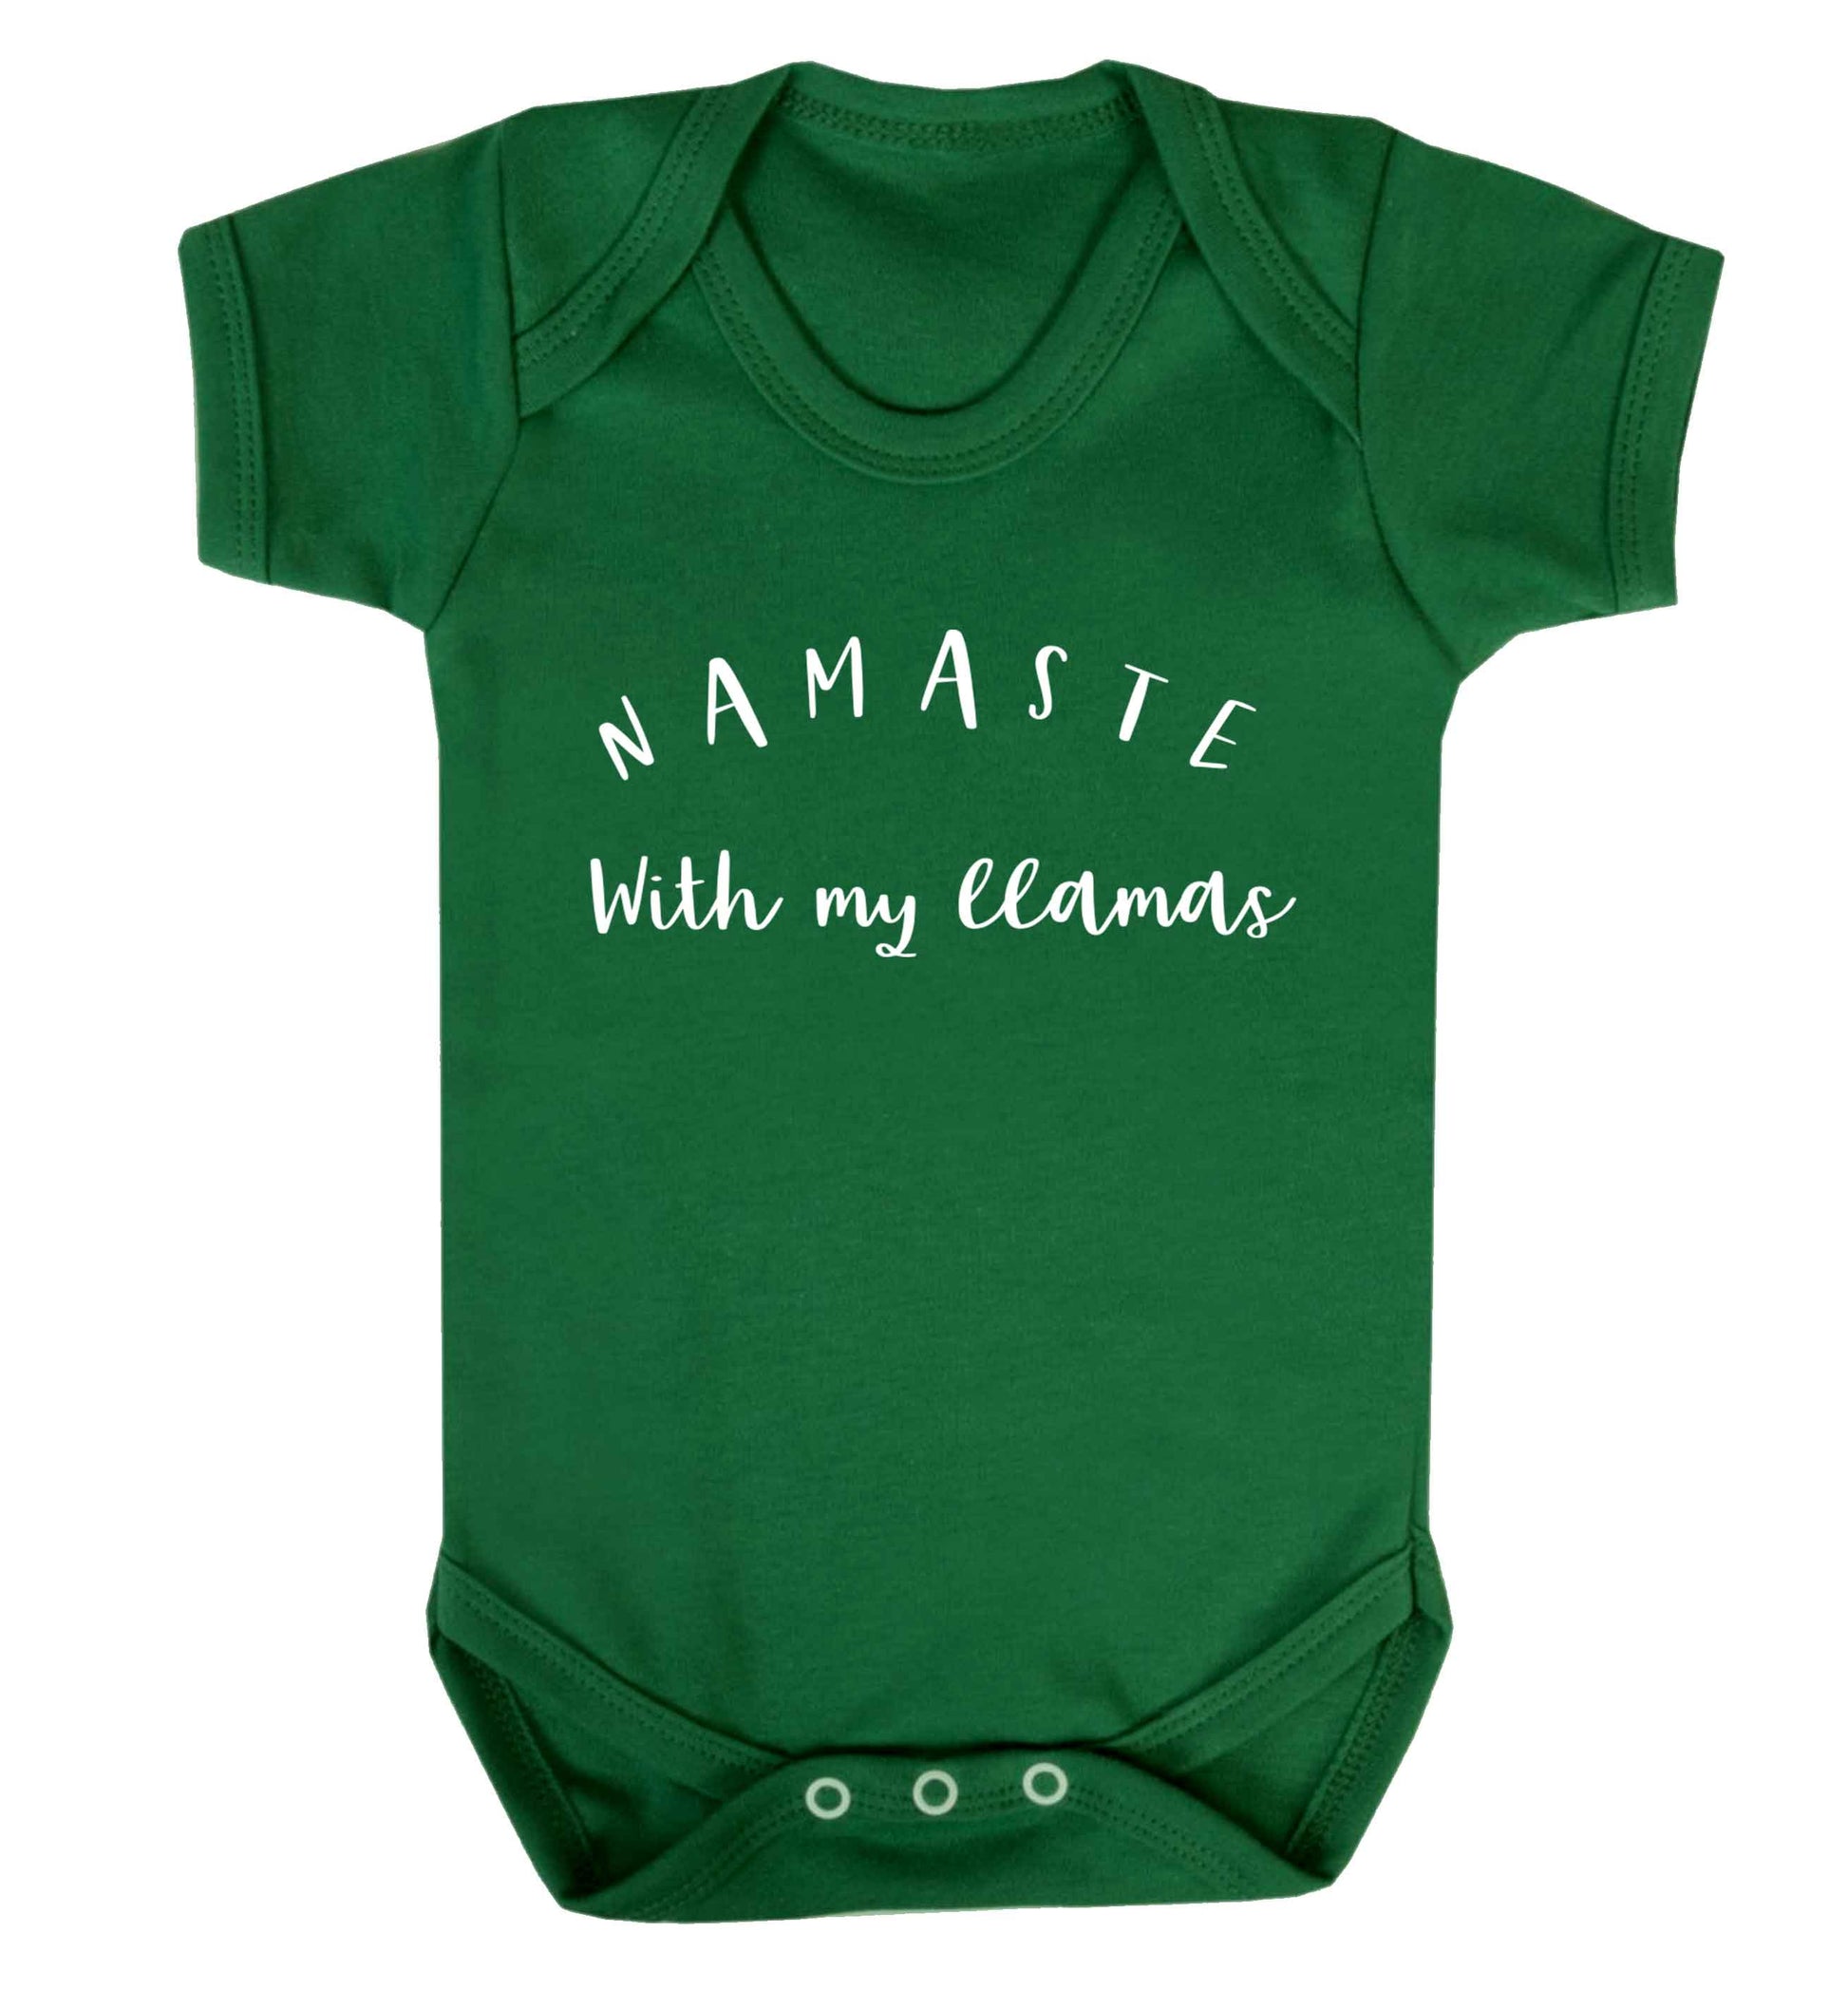 Namaste with my llamas Baby Vest green 18-24 months